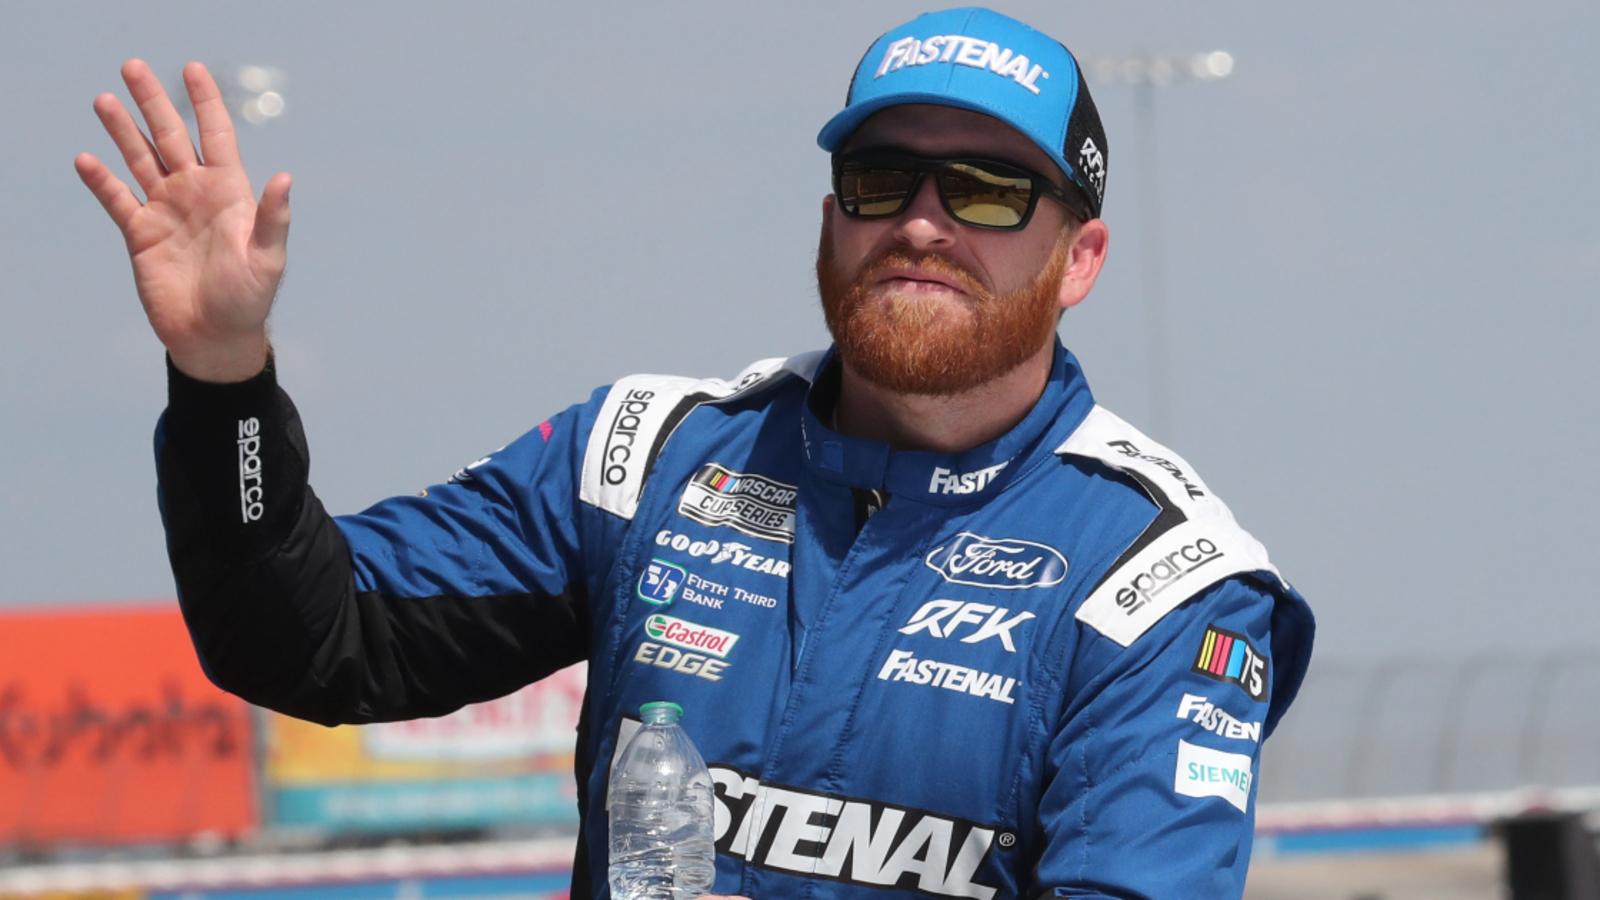 Chris Buescher to Dale Earnhardt Jr.: ‘This is going to hurt for a really, really long time’